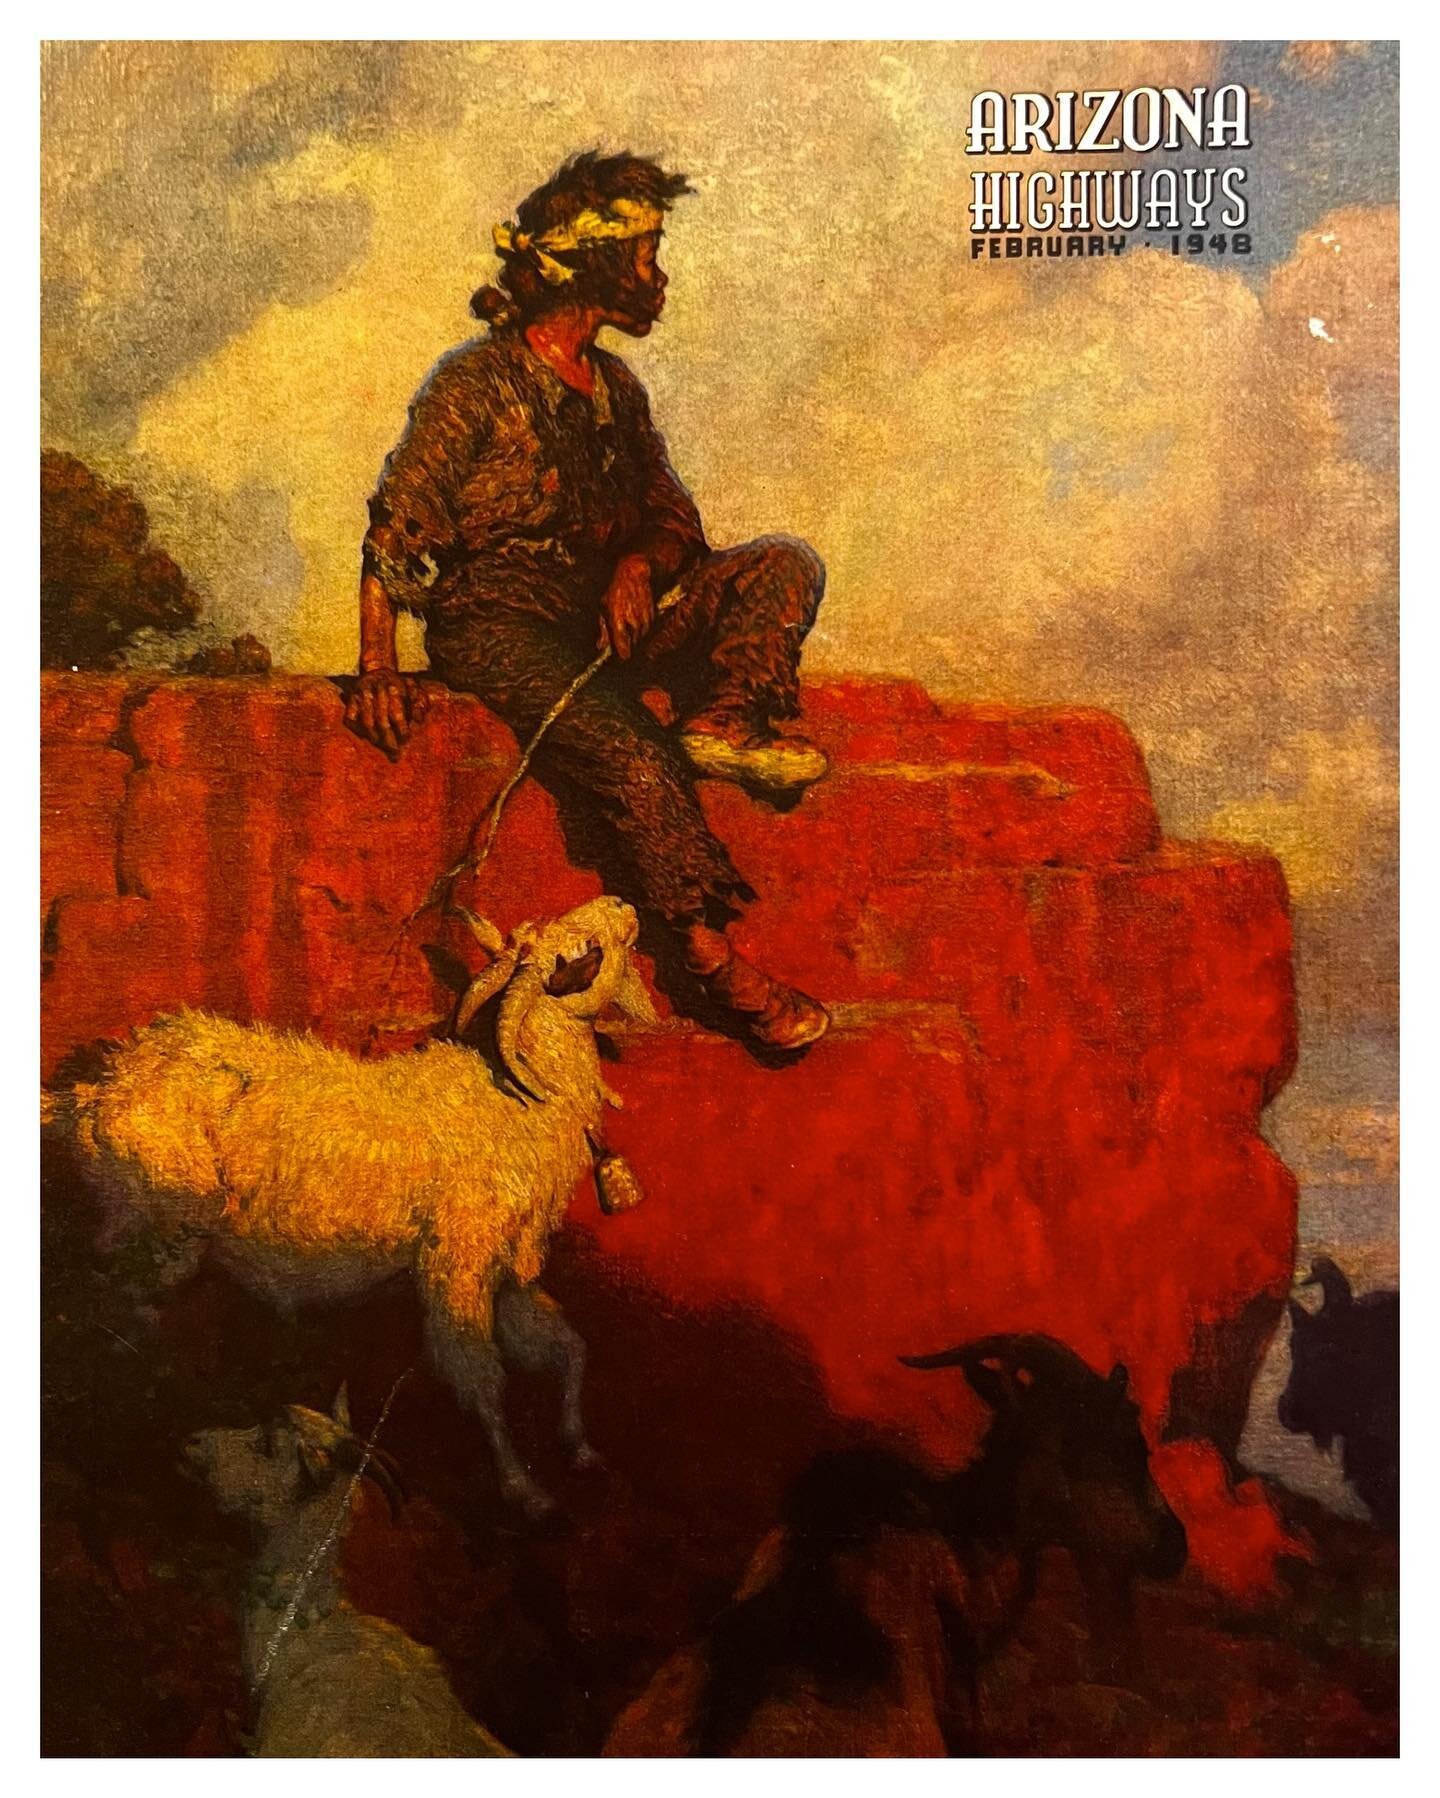 LAND OF HIS FATHERS by western artist William Robinson Leigh (1866-1955) from the February 1948 issue of Arizona Highways. This original vintage print from 1948 features a young Navajo boy tending his goats while looking out over the vast desert land